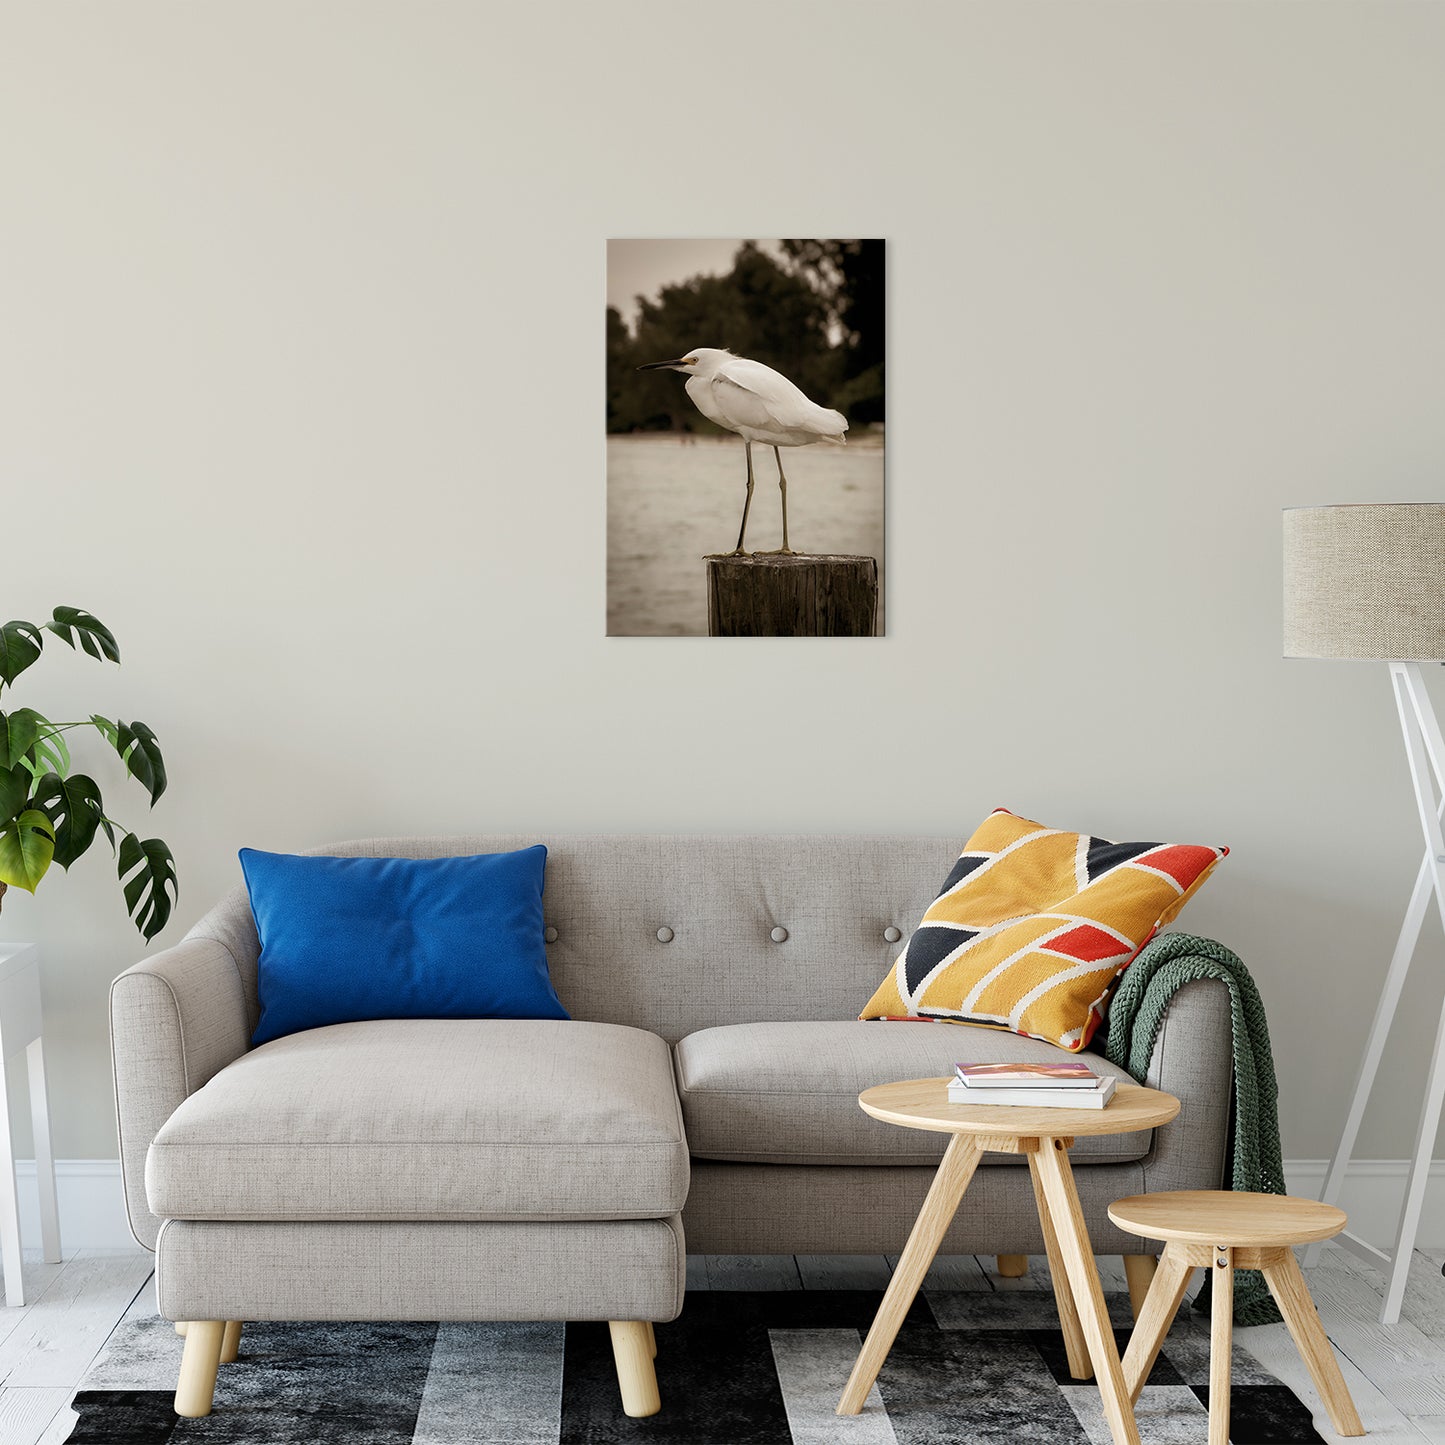 Classic Wall Decor For Living Room: Aged Colorized Snowy Egret on Pillar Wildlife Photo Fine Art Canvas & Unframed Wall Art Prints 20" x 30" / Canvas Fine Art - PIPAFINEART